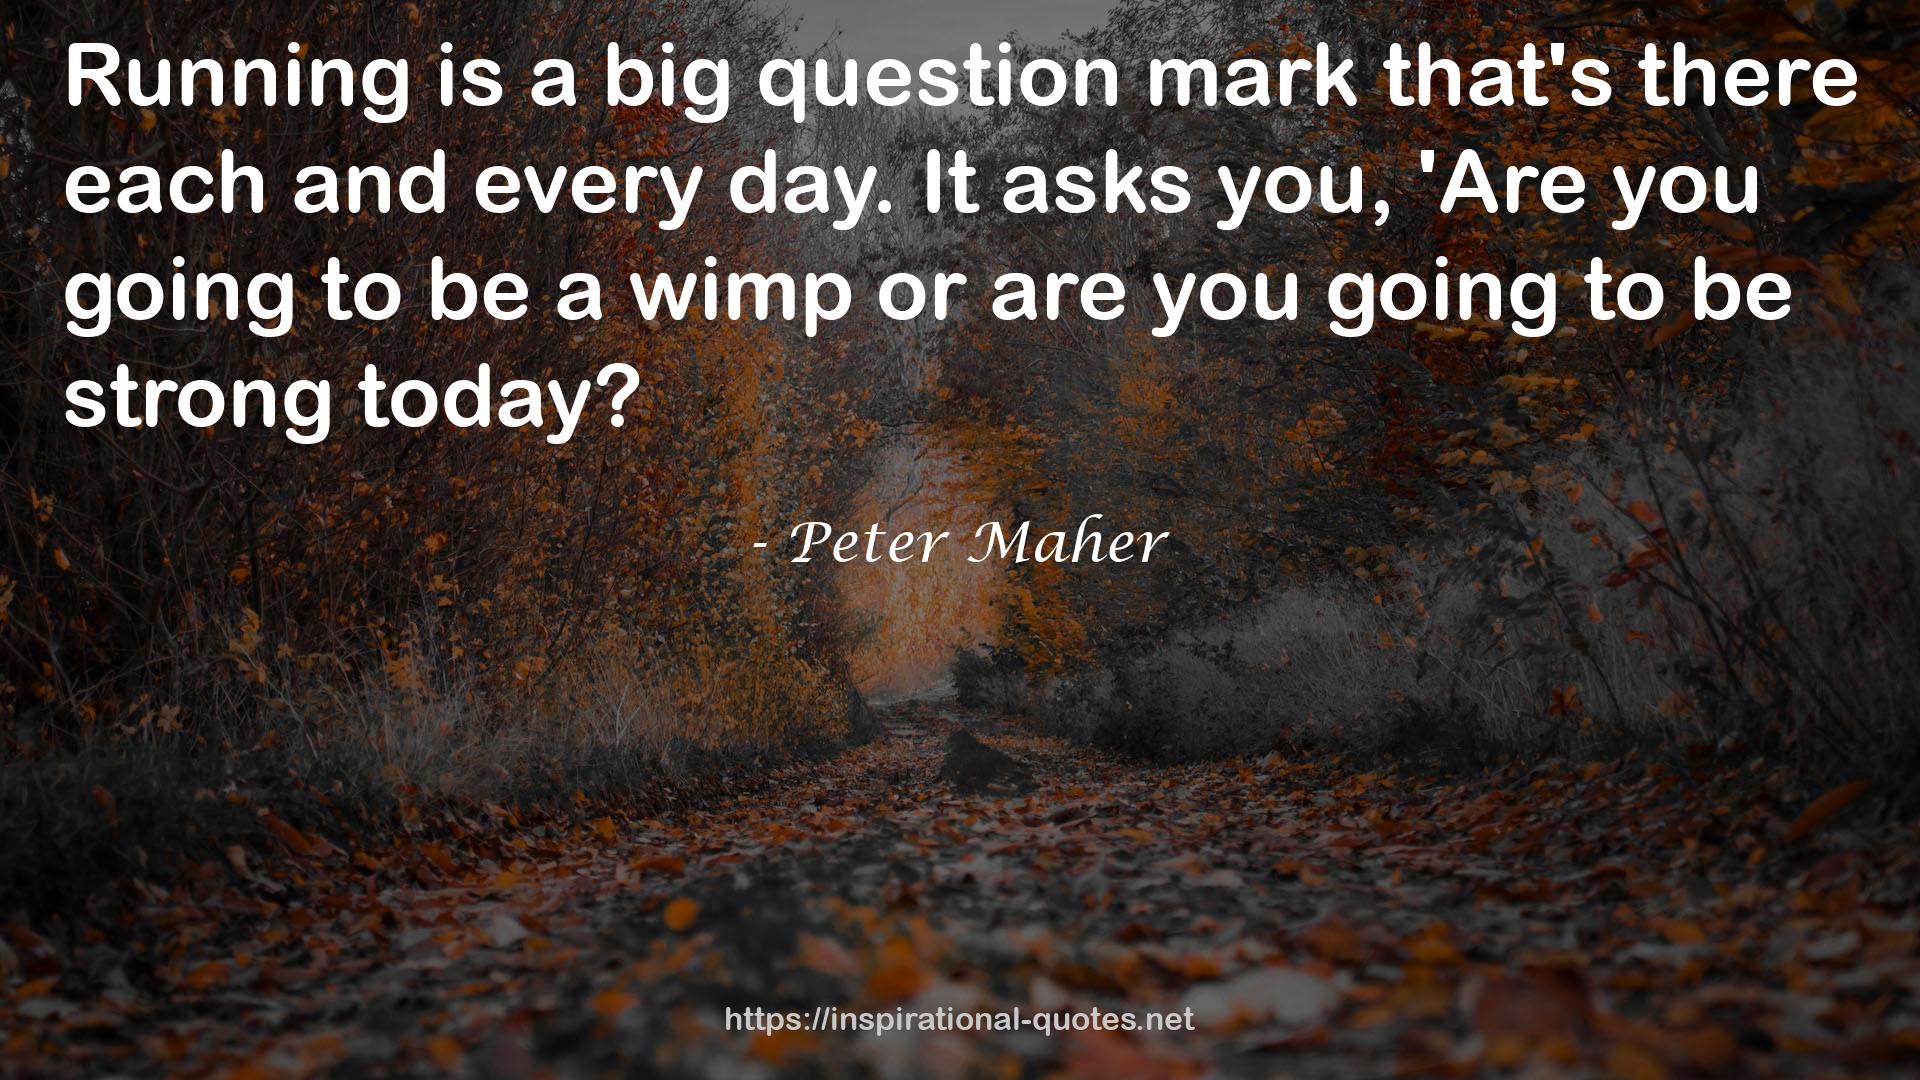 Peter Maher QUOTES